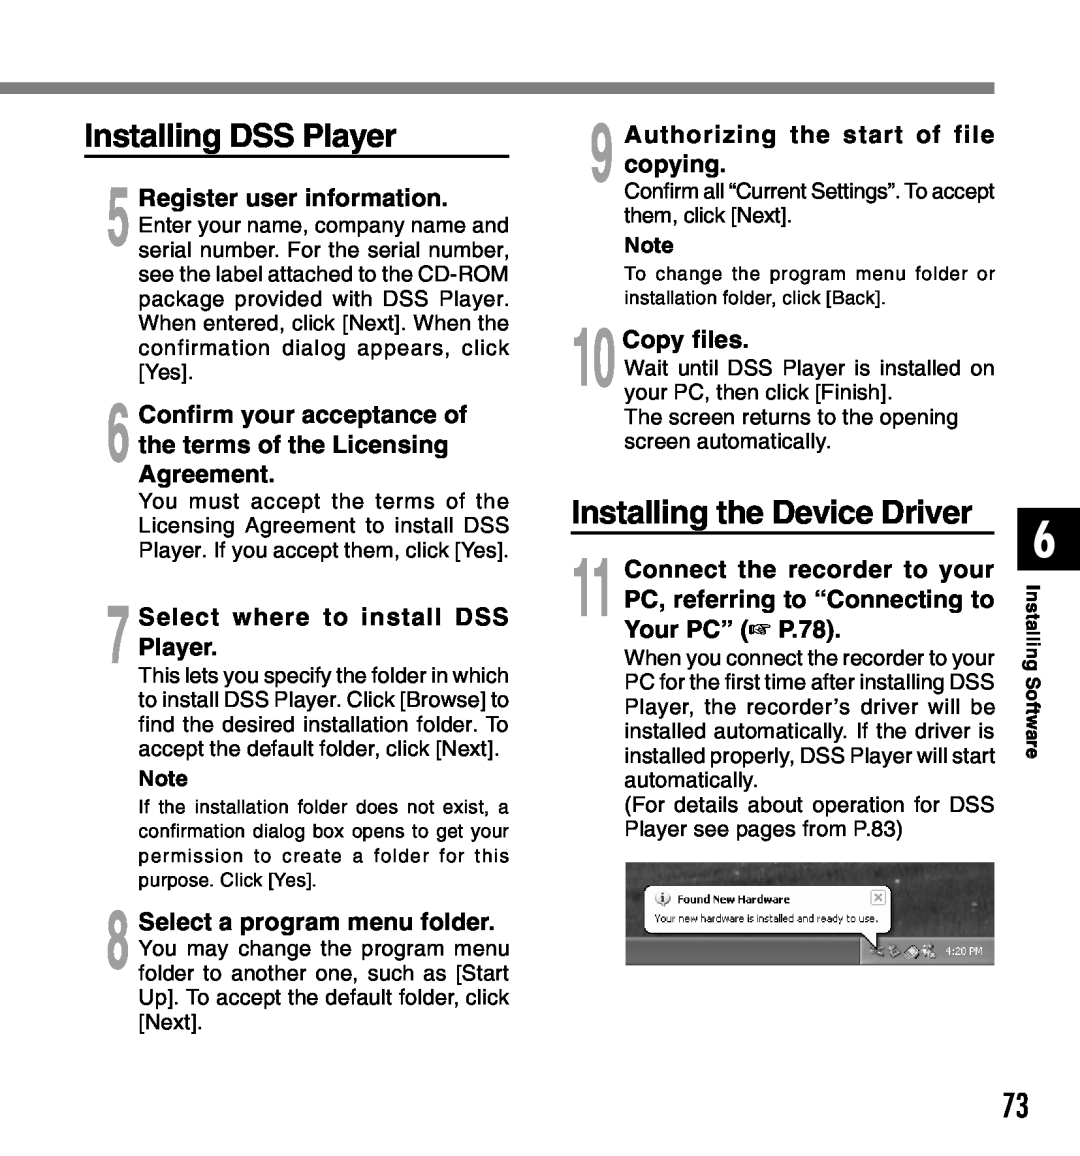 Olympus 2 manual Installing DSS Player, Installing the Device Driver, Select where to install DSS Player, 10Copy files 